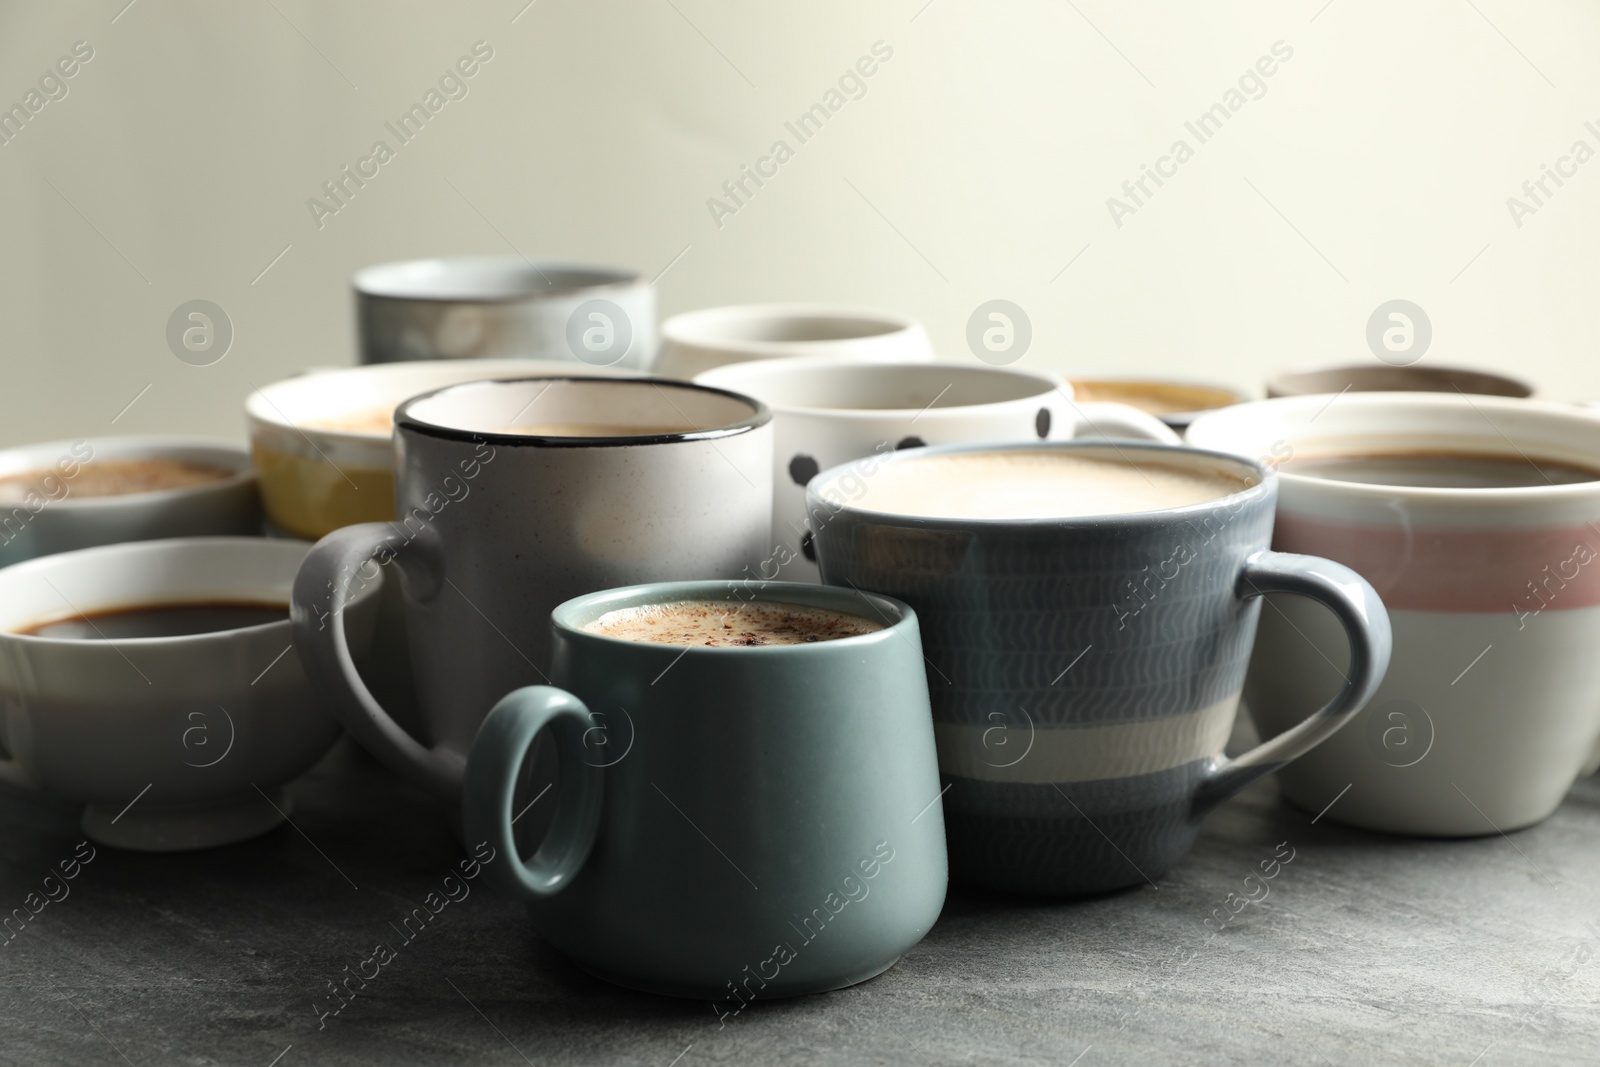 Photo of Many cups of different coffees on slate table